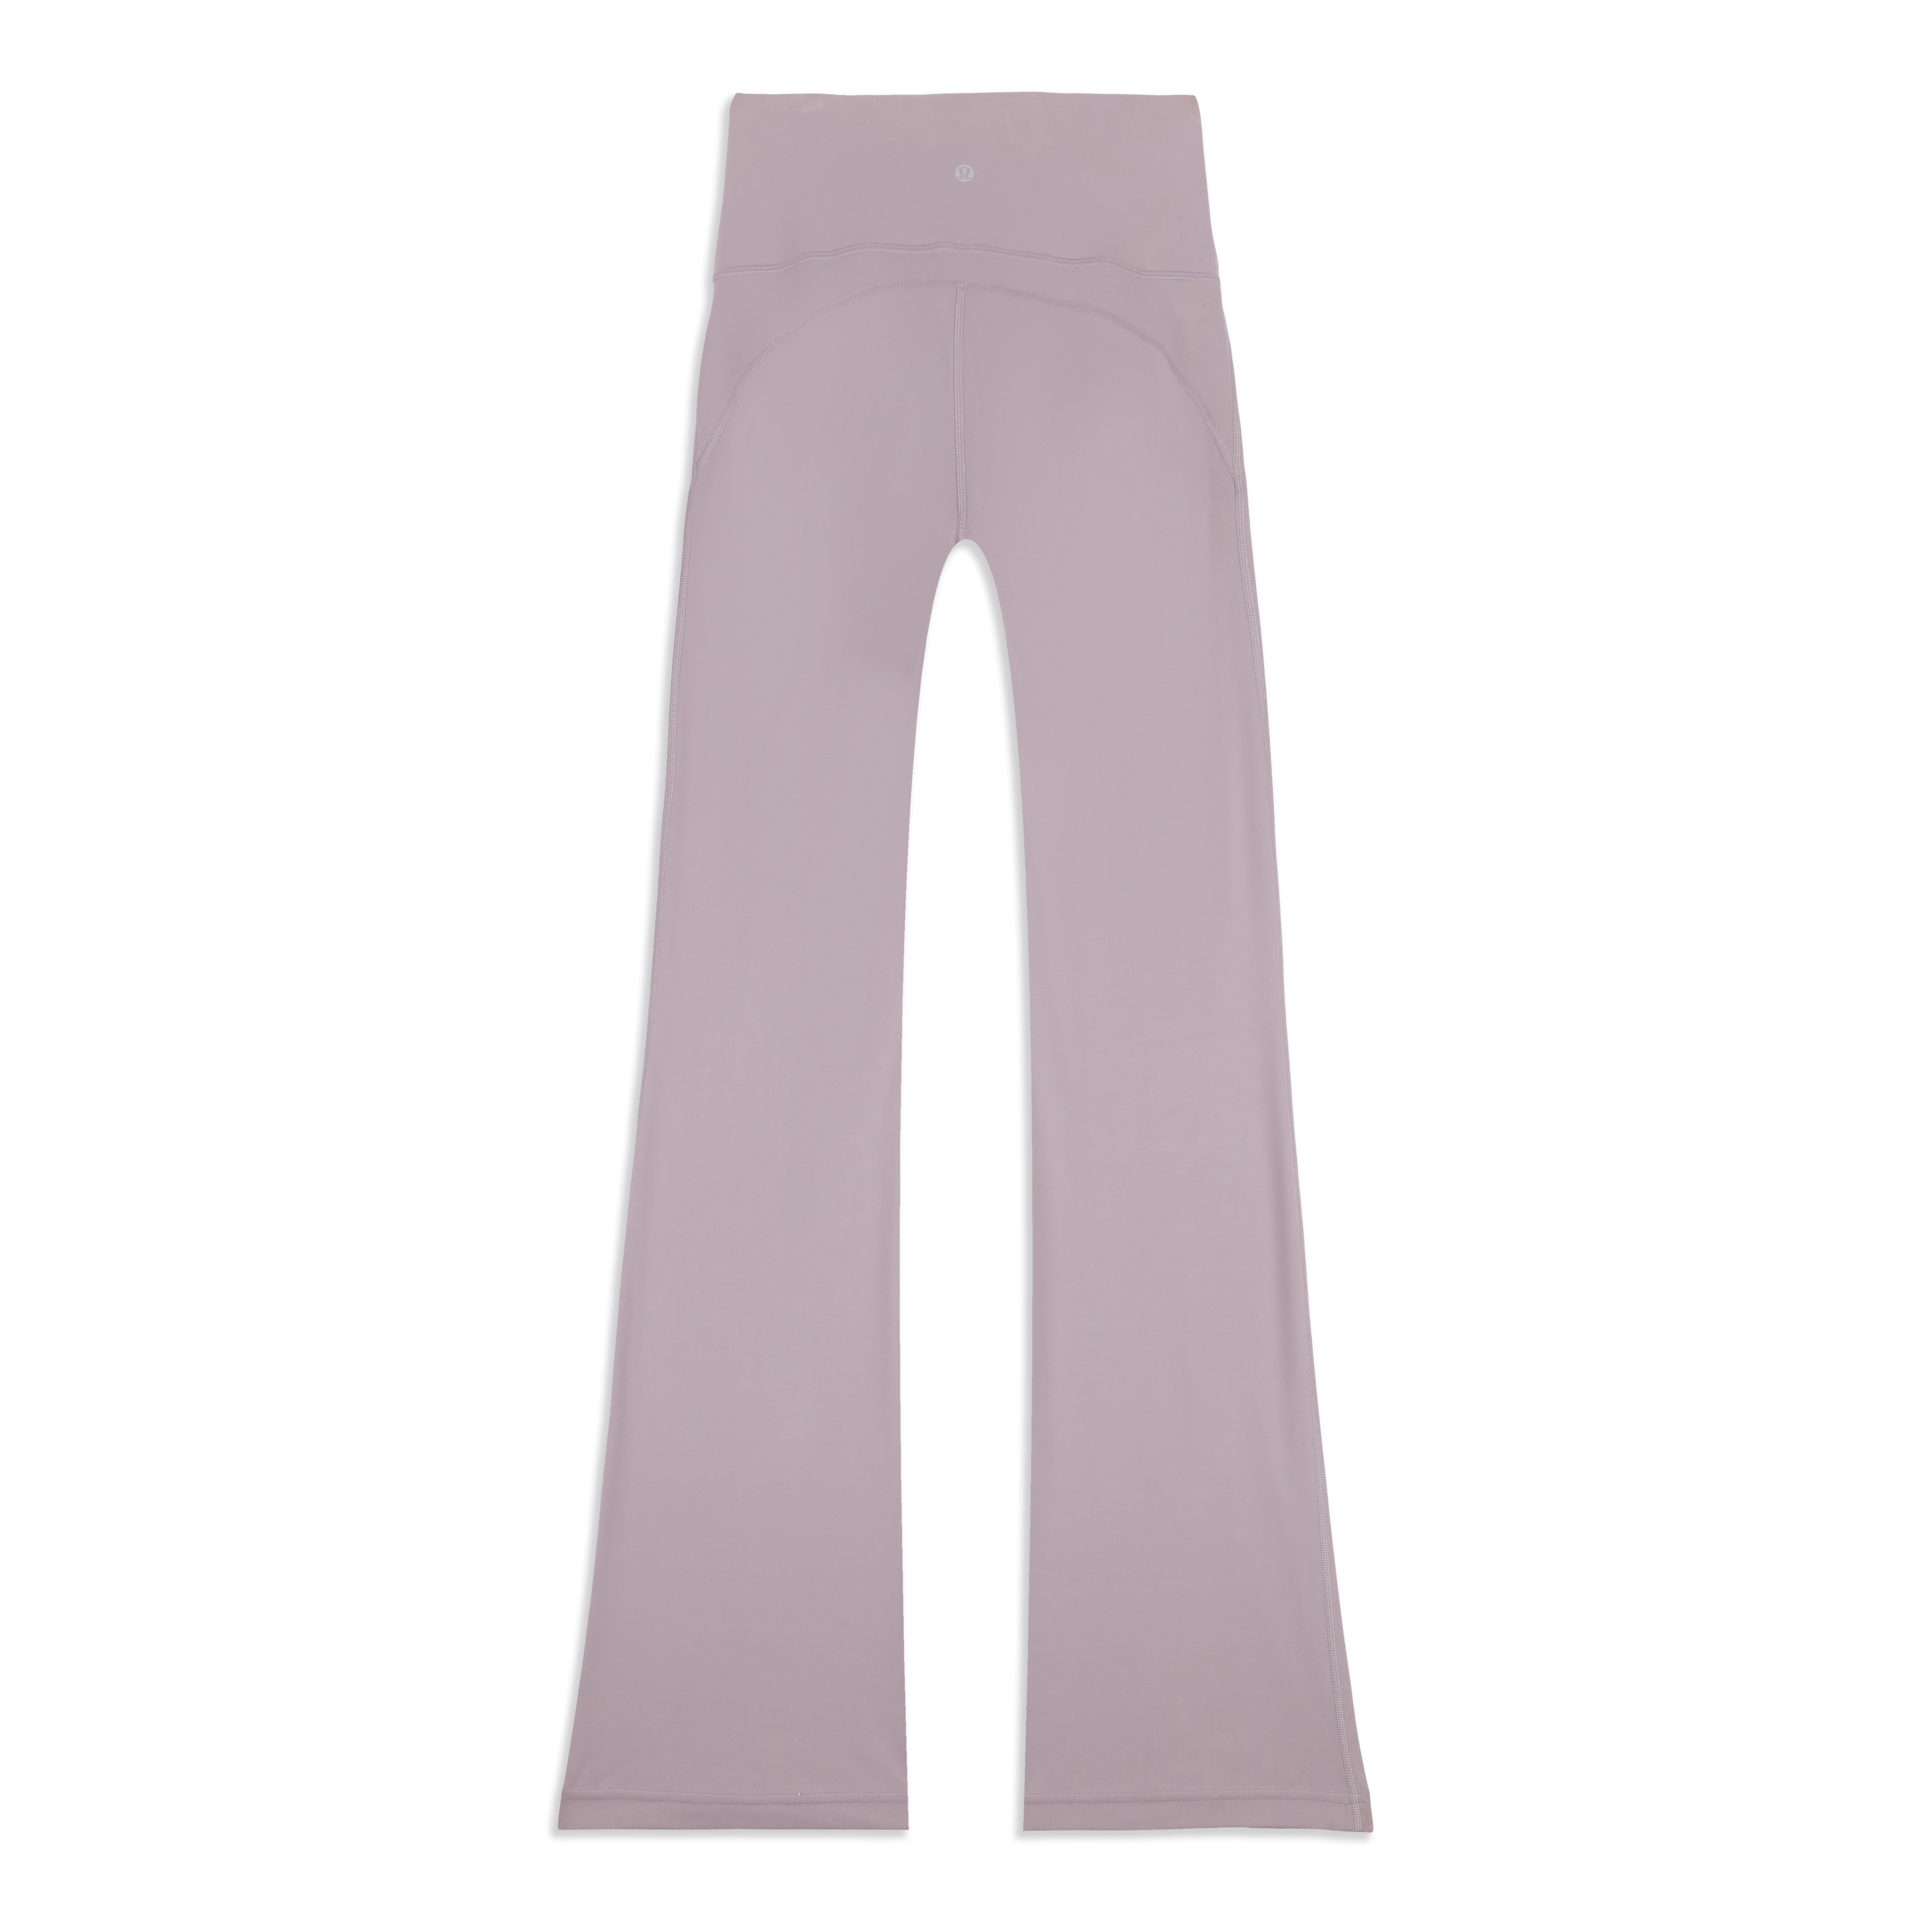 Lululemon Athletica Women's Flare Pants On Sale Up To 90% Off